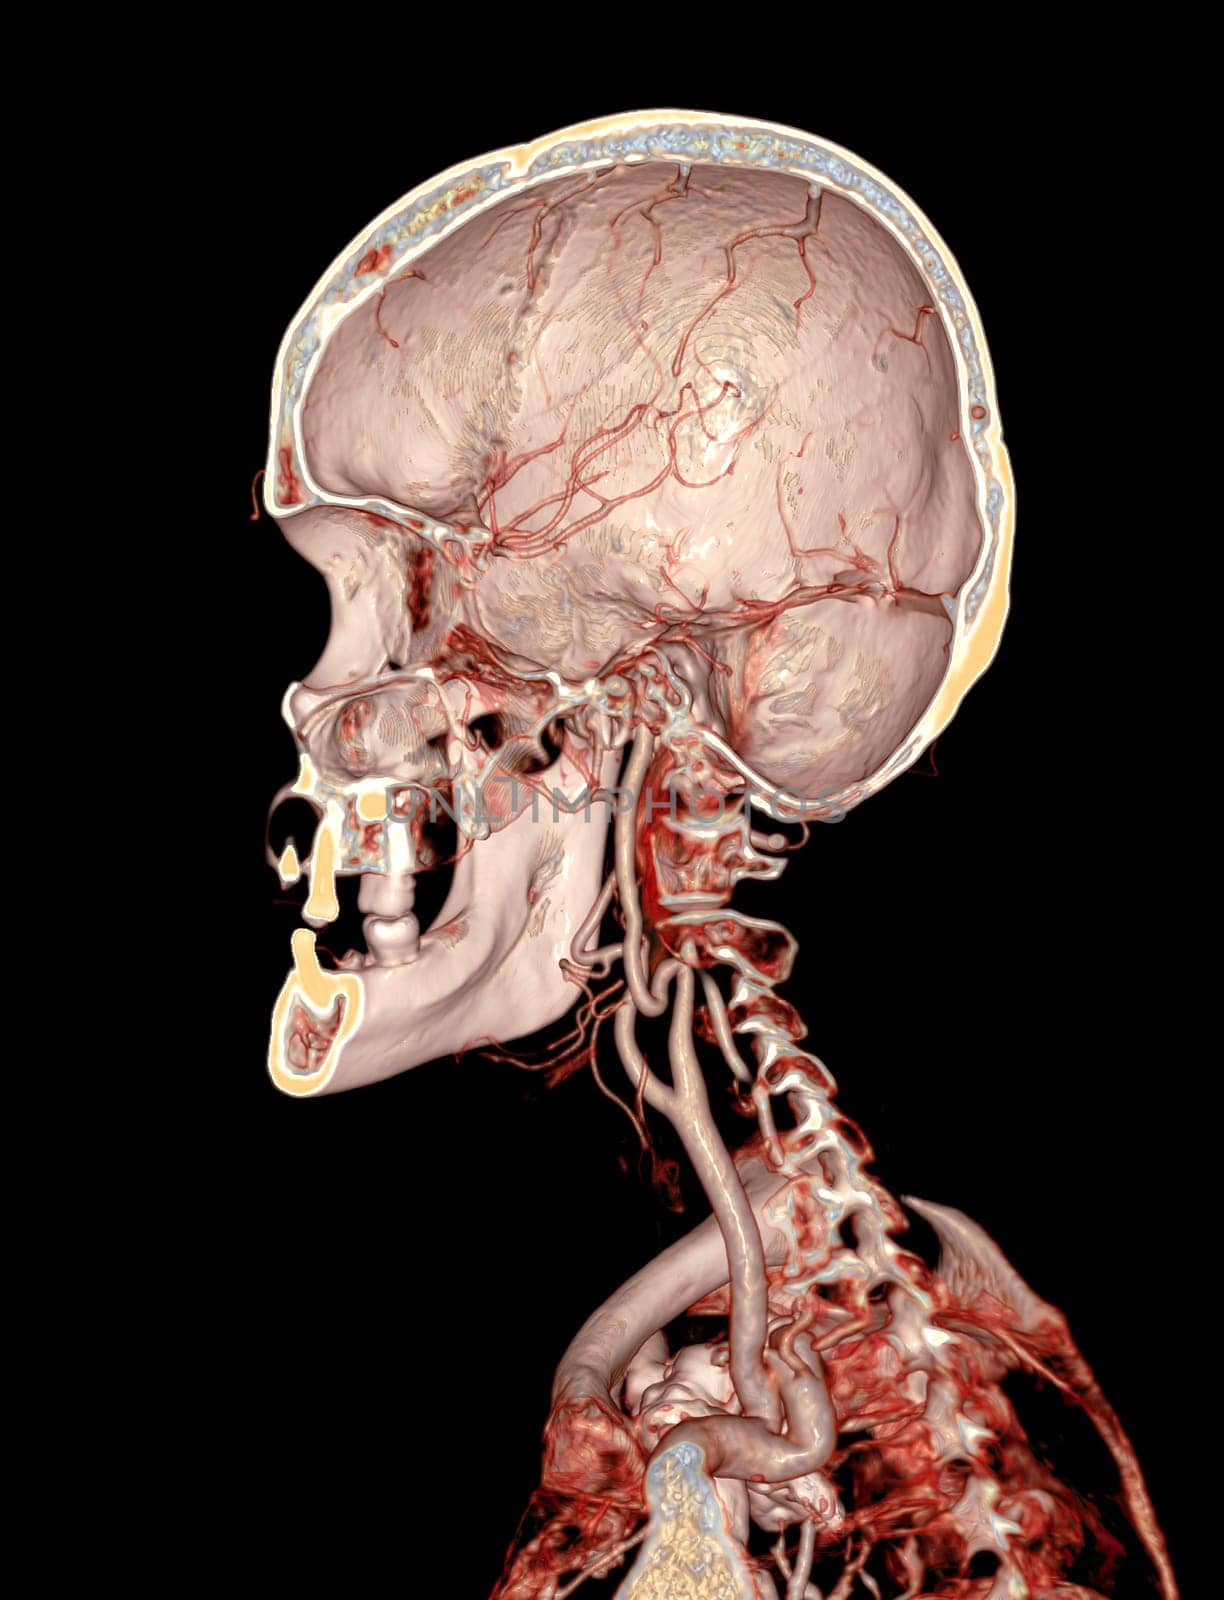  CTA brain and carotid artery or CT angiography of the brain  3D Rendering image .